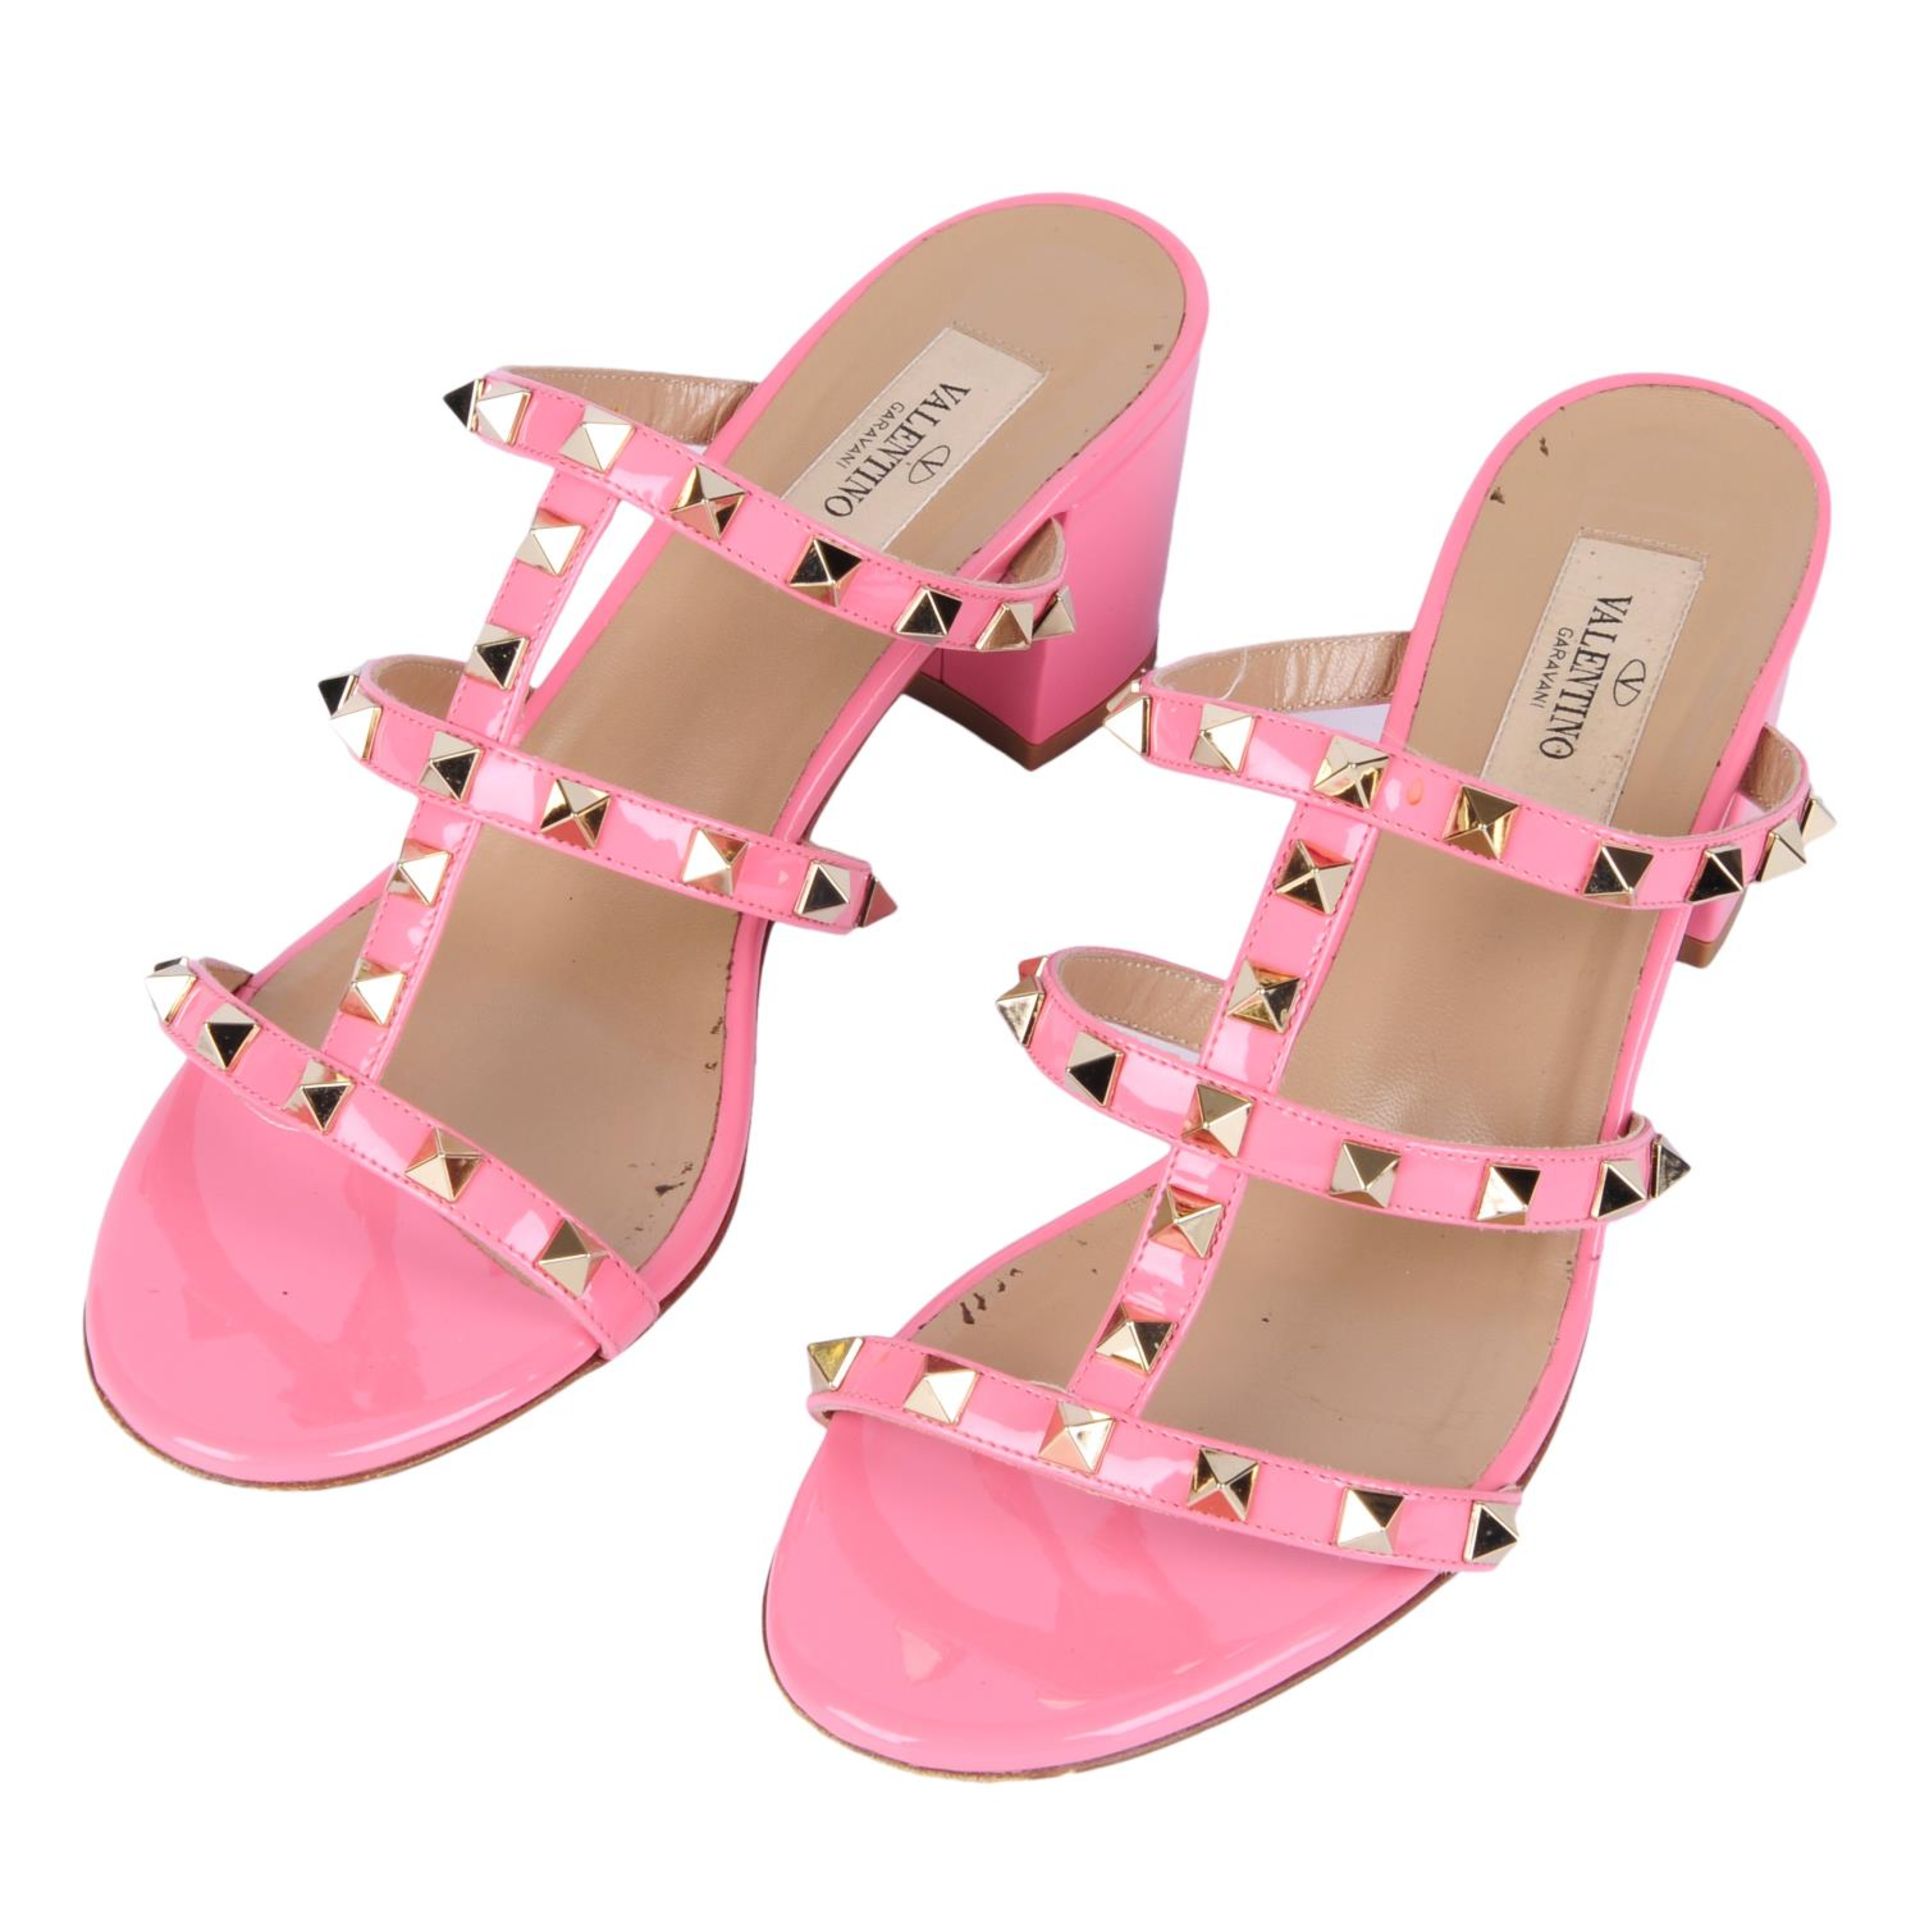 VALENTINO - a pair of pink patent leather Rockstud slip-on sandals.